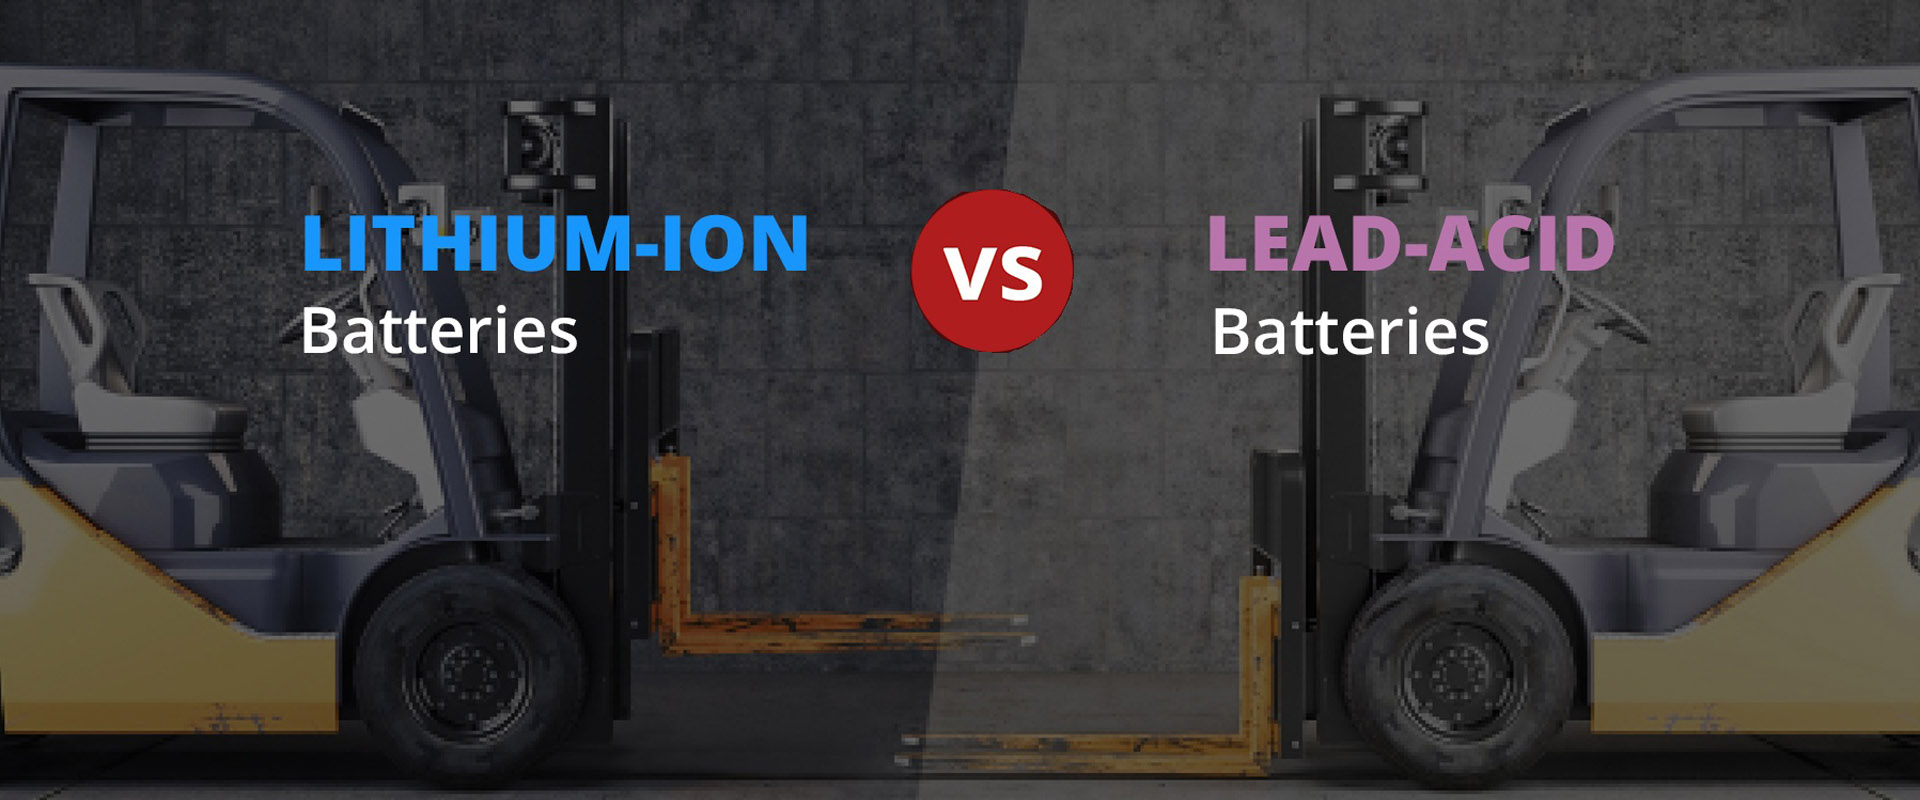 Lithium-ion VS Lead-acid Battery Which is Better for My Solar System?